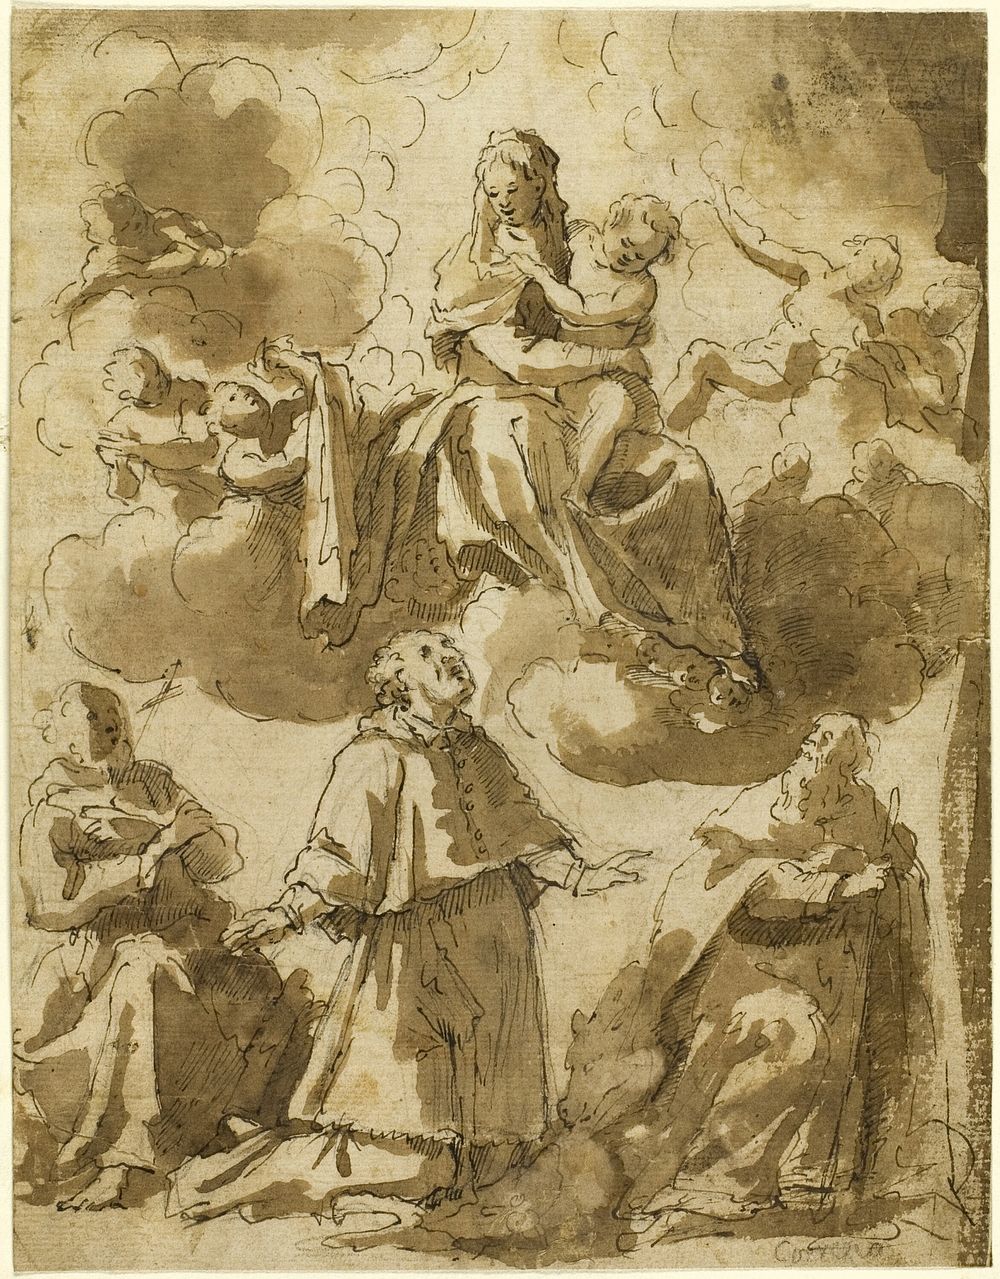 Madonna and Child in Glory, with Three Male Saints Below by Francesco Vanni